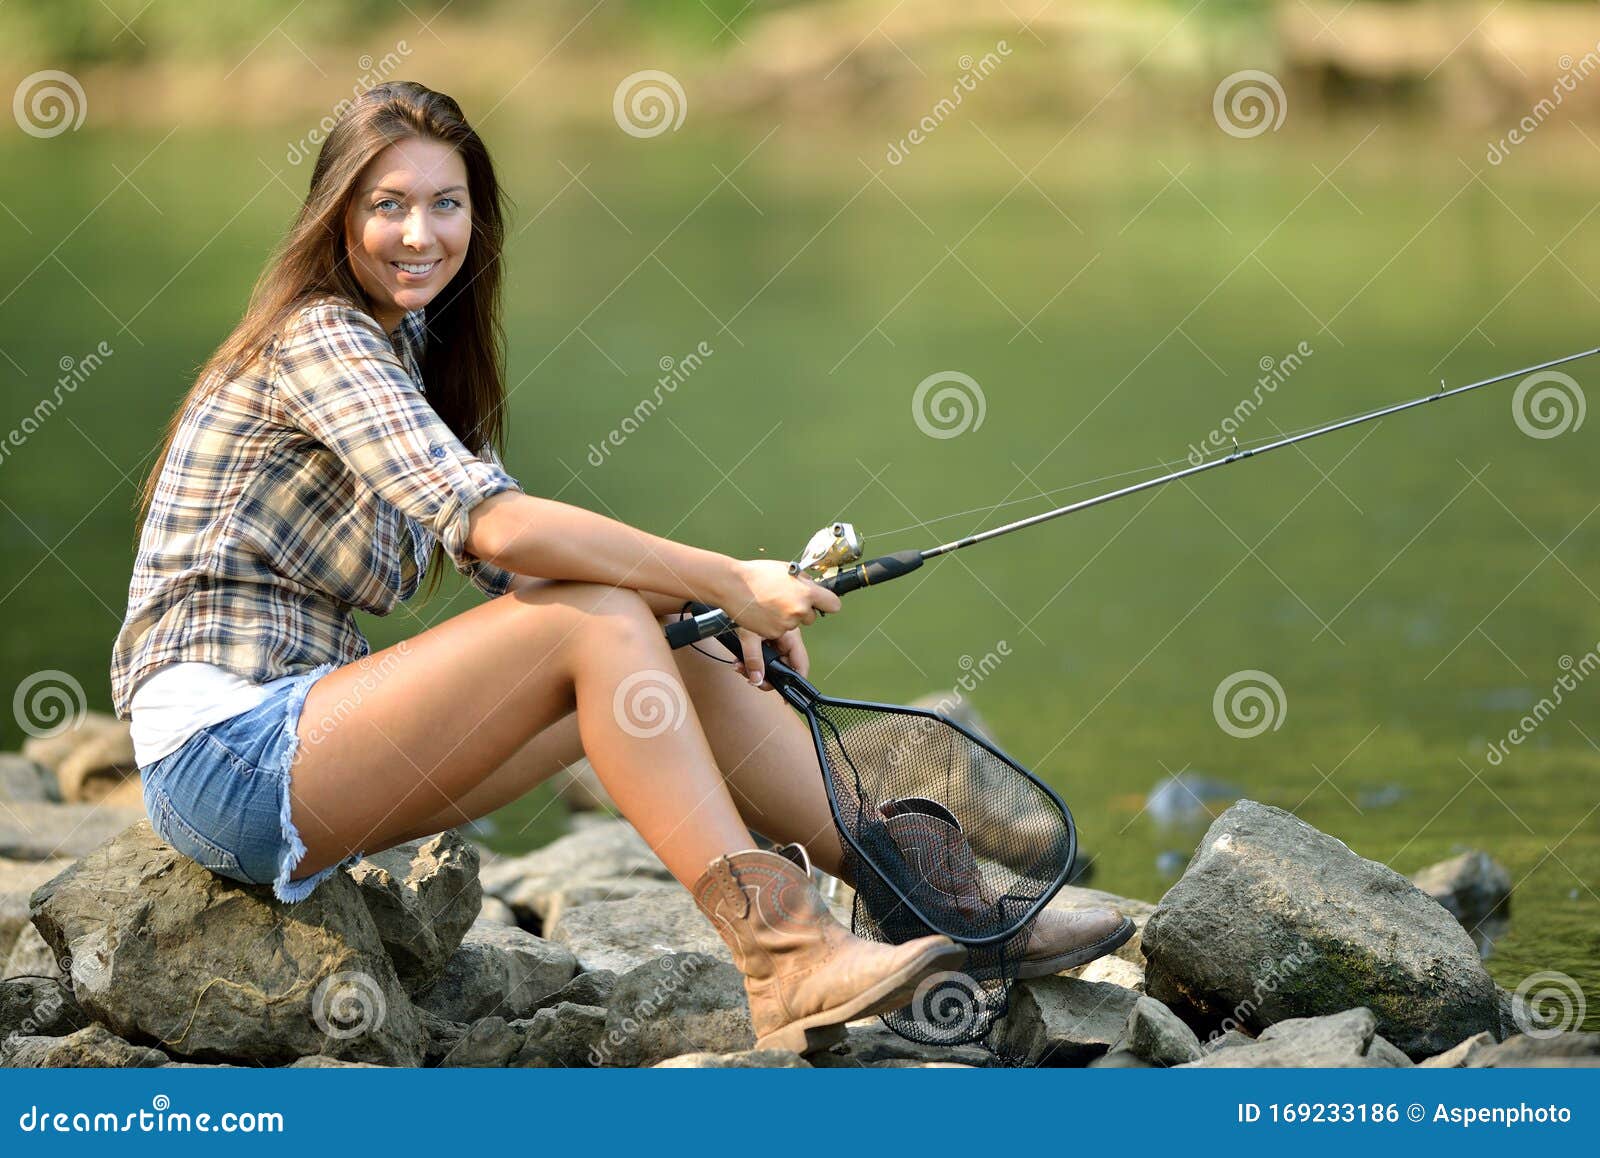 Young Woman Sitting Near River Fishing Stock Photo - Image of